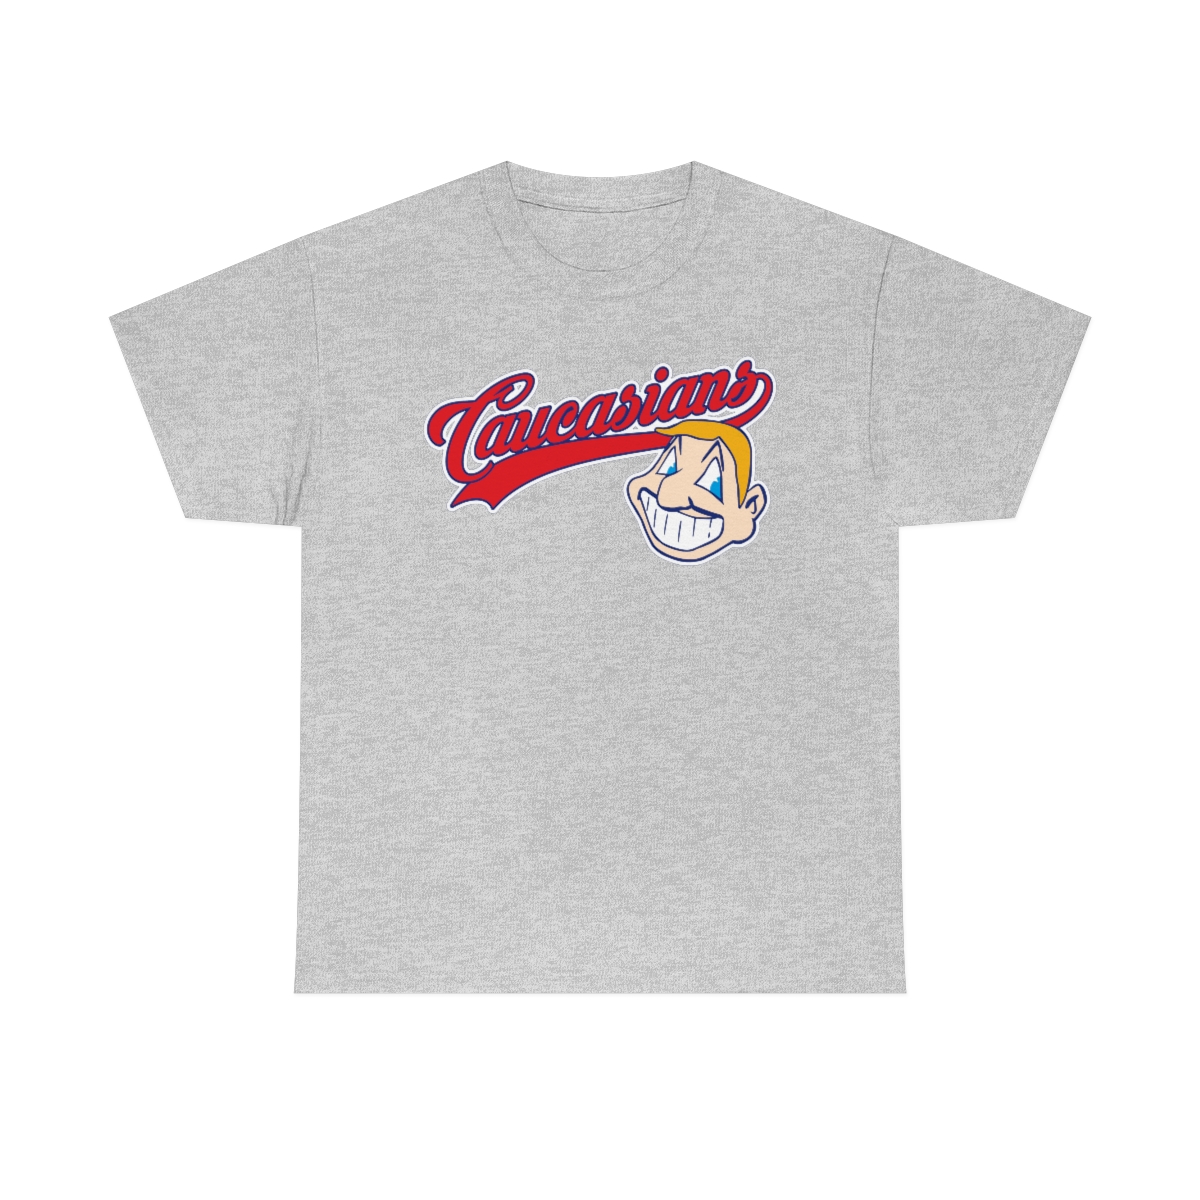 Caucasian People Cleveland Indians 1915 Shirt - Printing Ooze